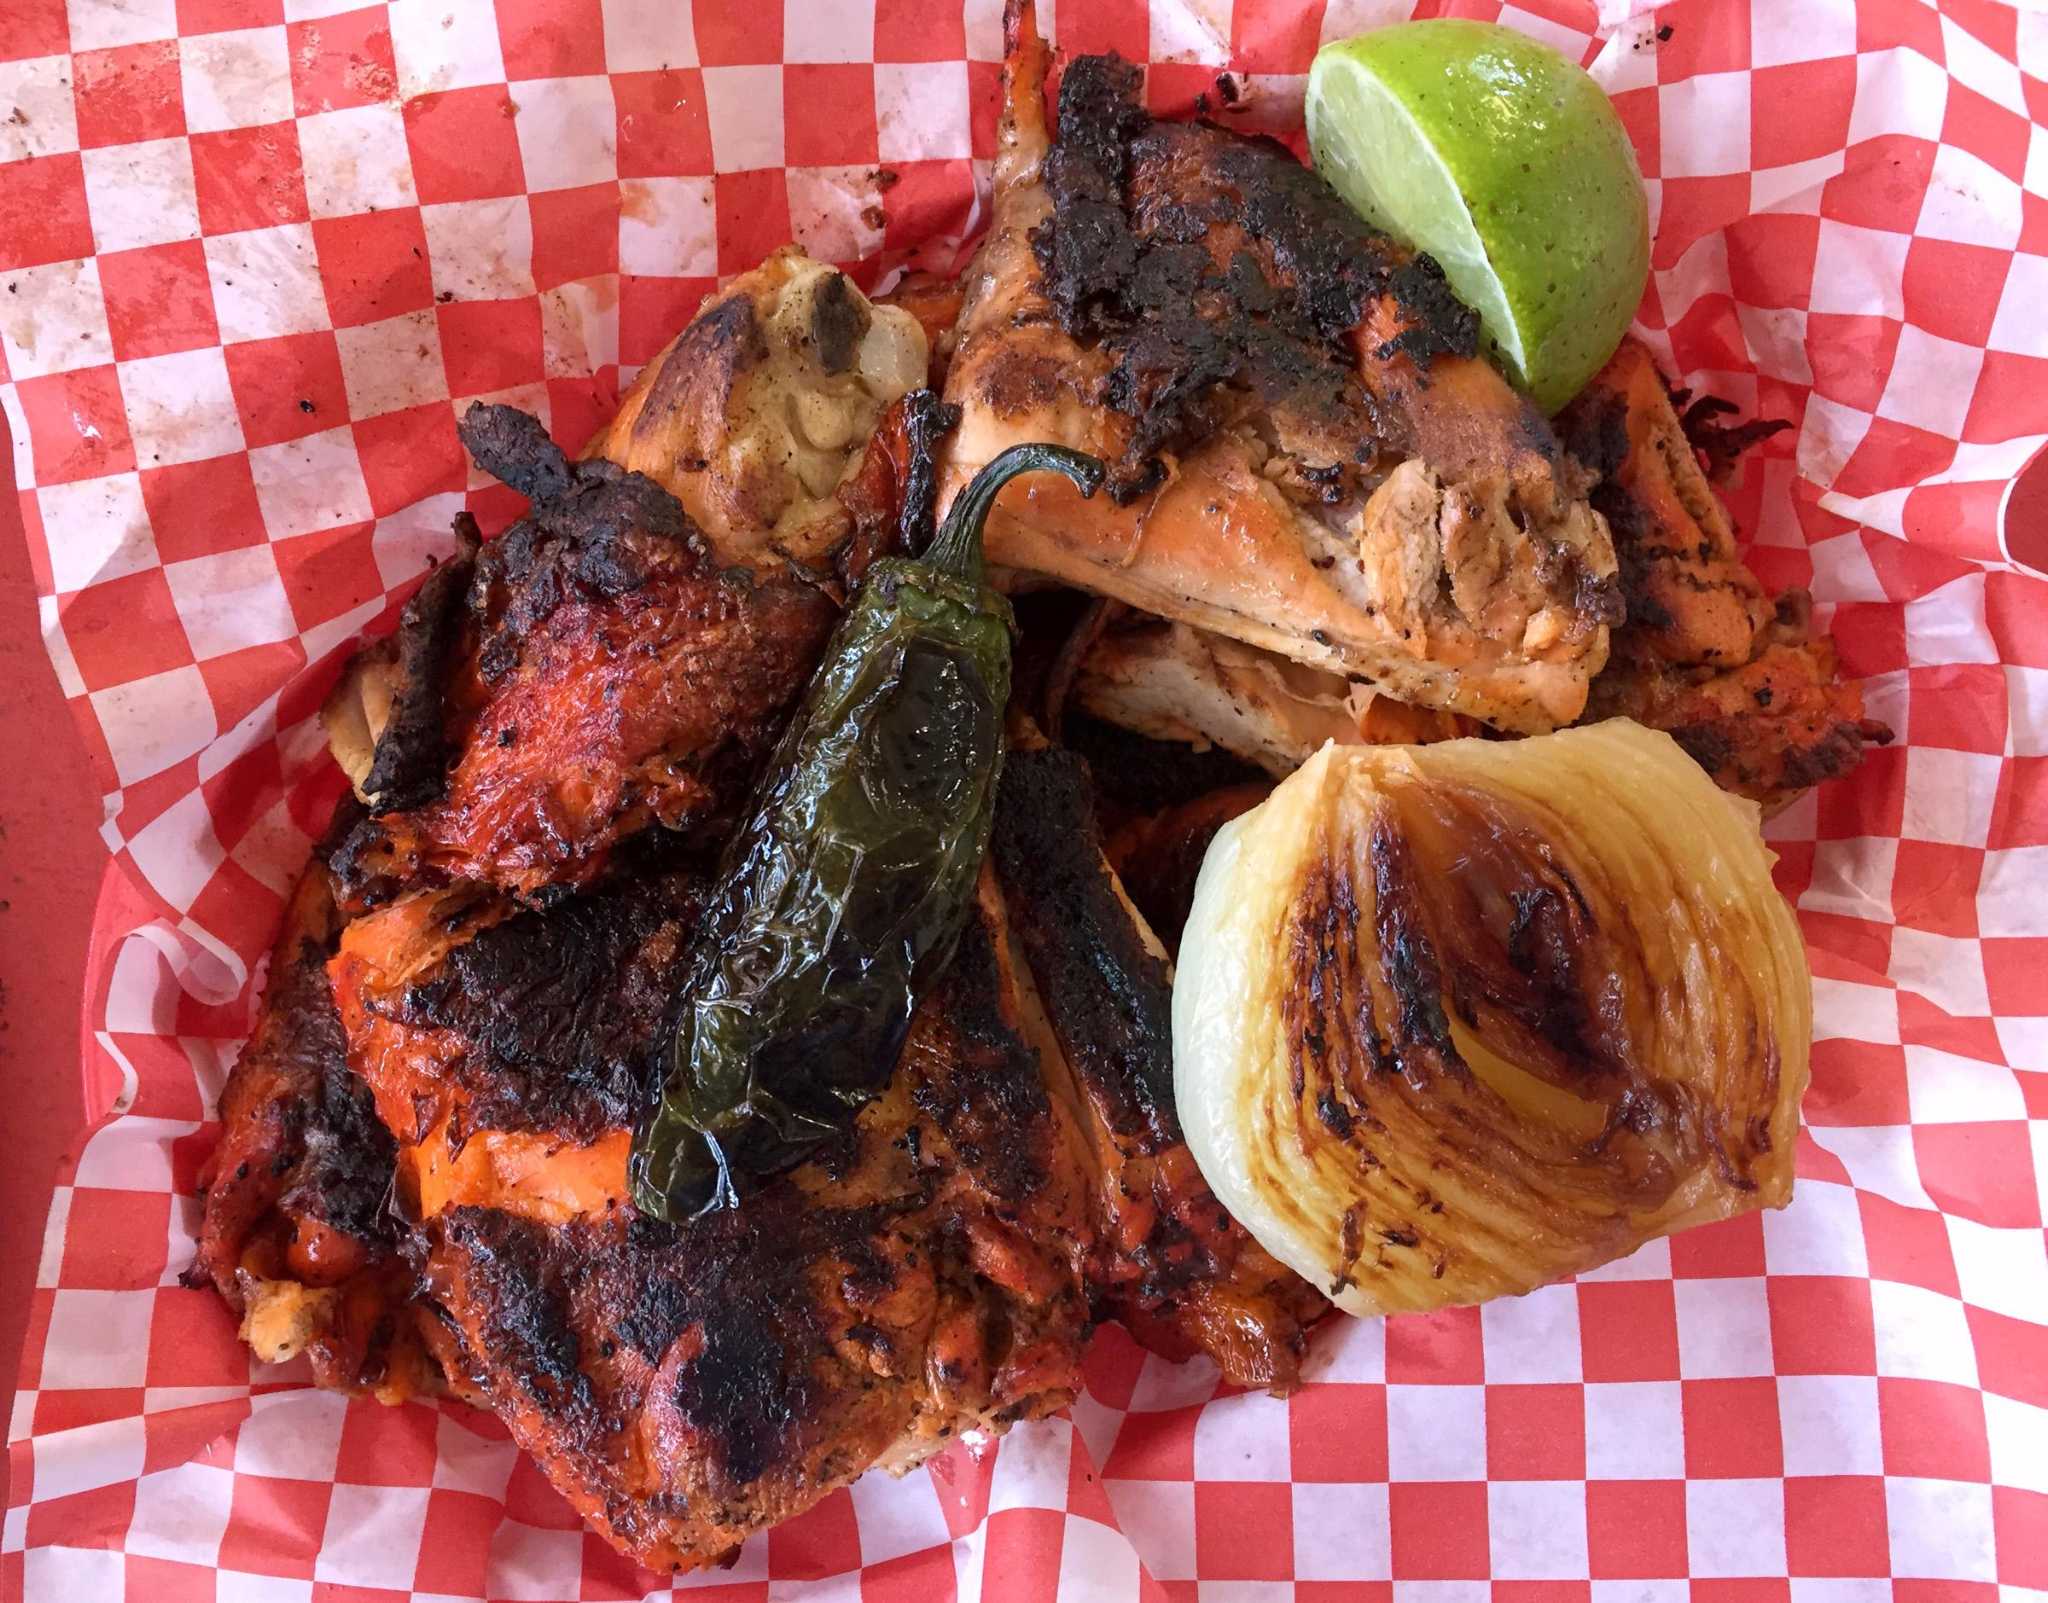 New Culebra chicken joint Pollos Asados Don Carbon sued, changes name